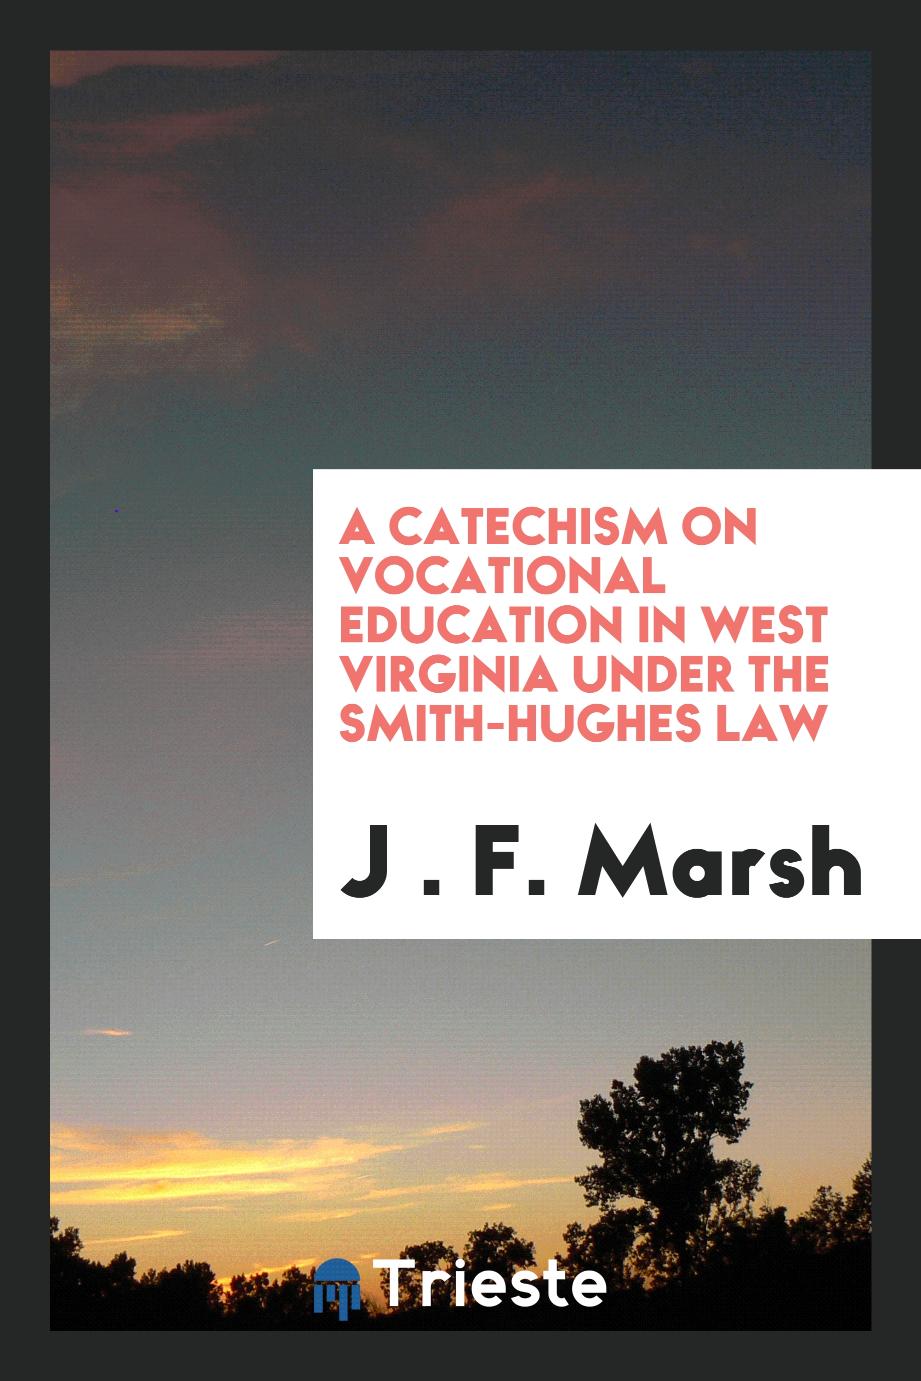 A Catechism on Vocational Education in West Virginia Under the Smith-Hughes Law